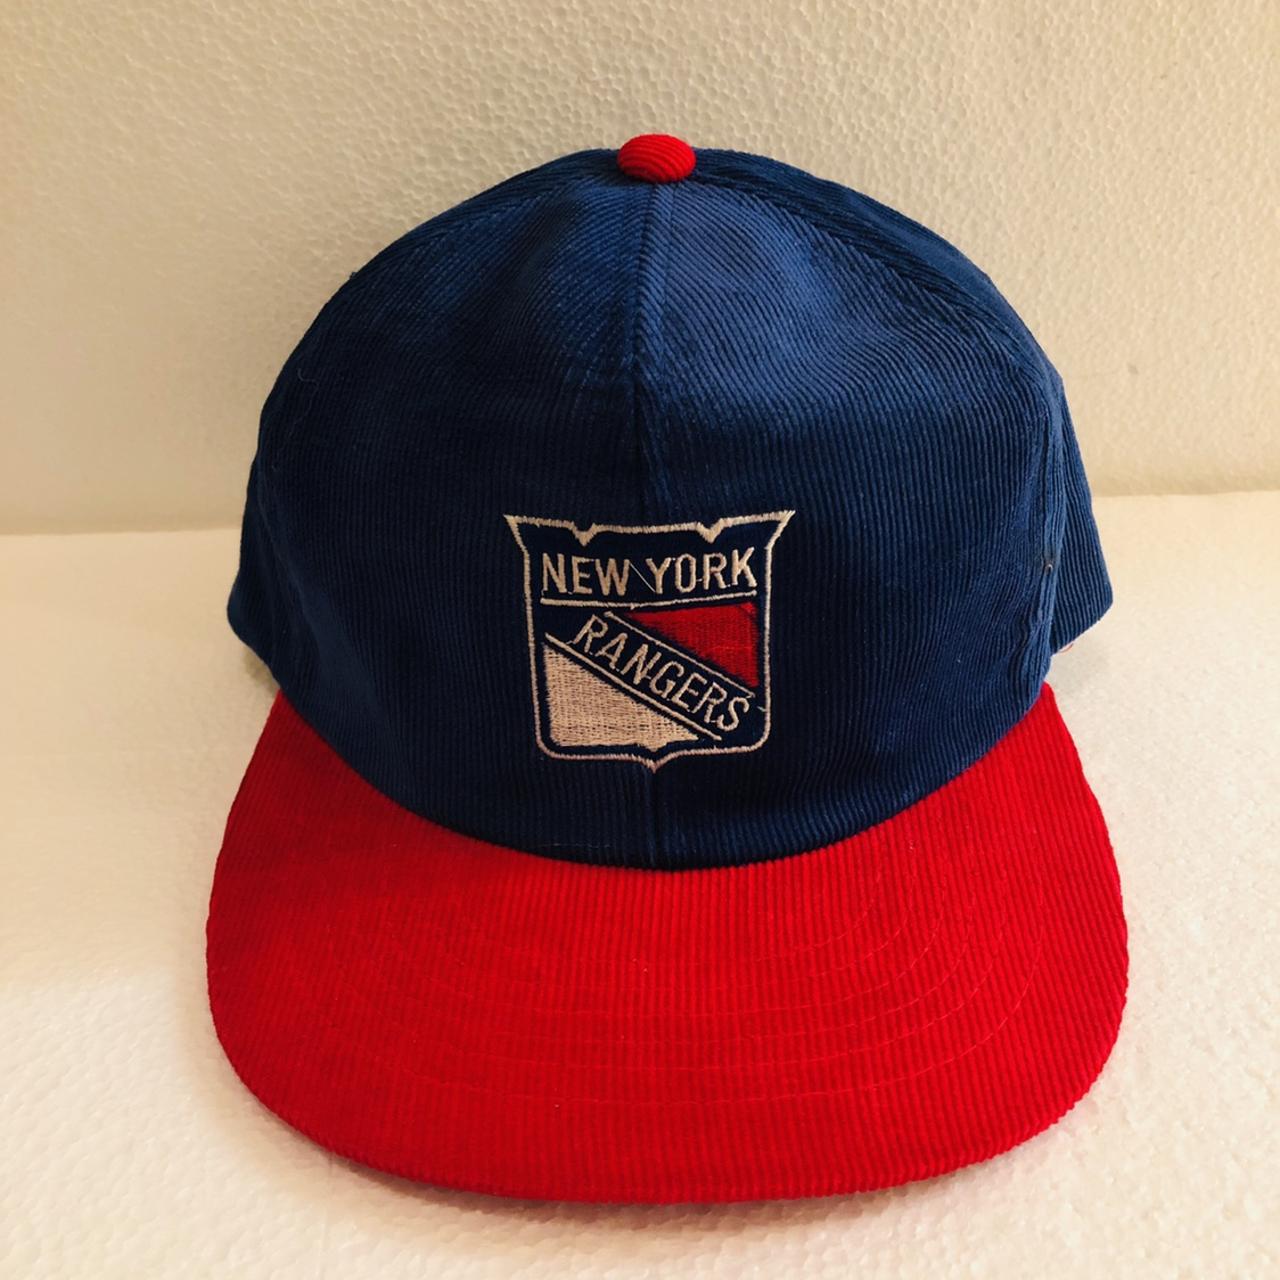 New York rangers fitted hat #rangers #hats #NHL - Depop